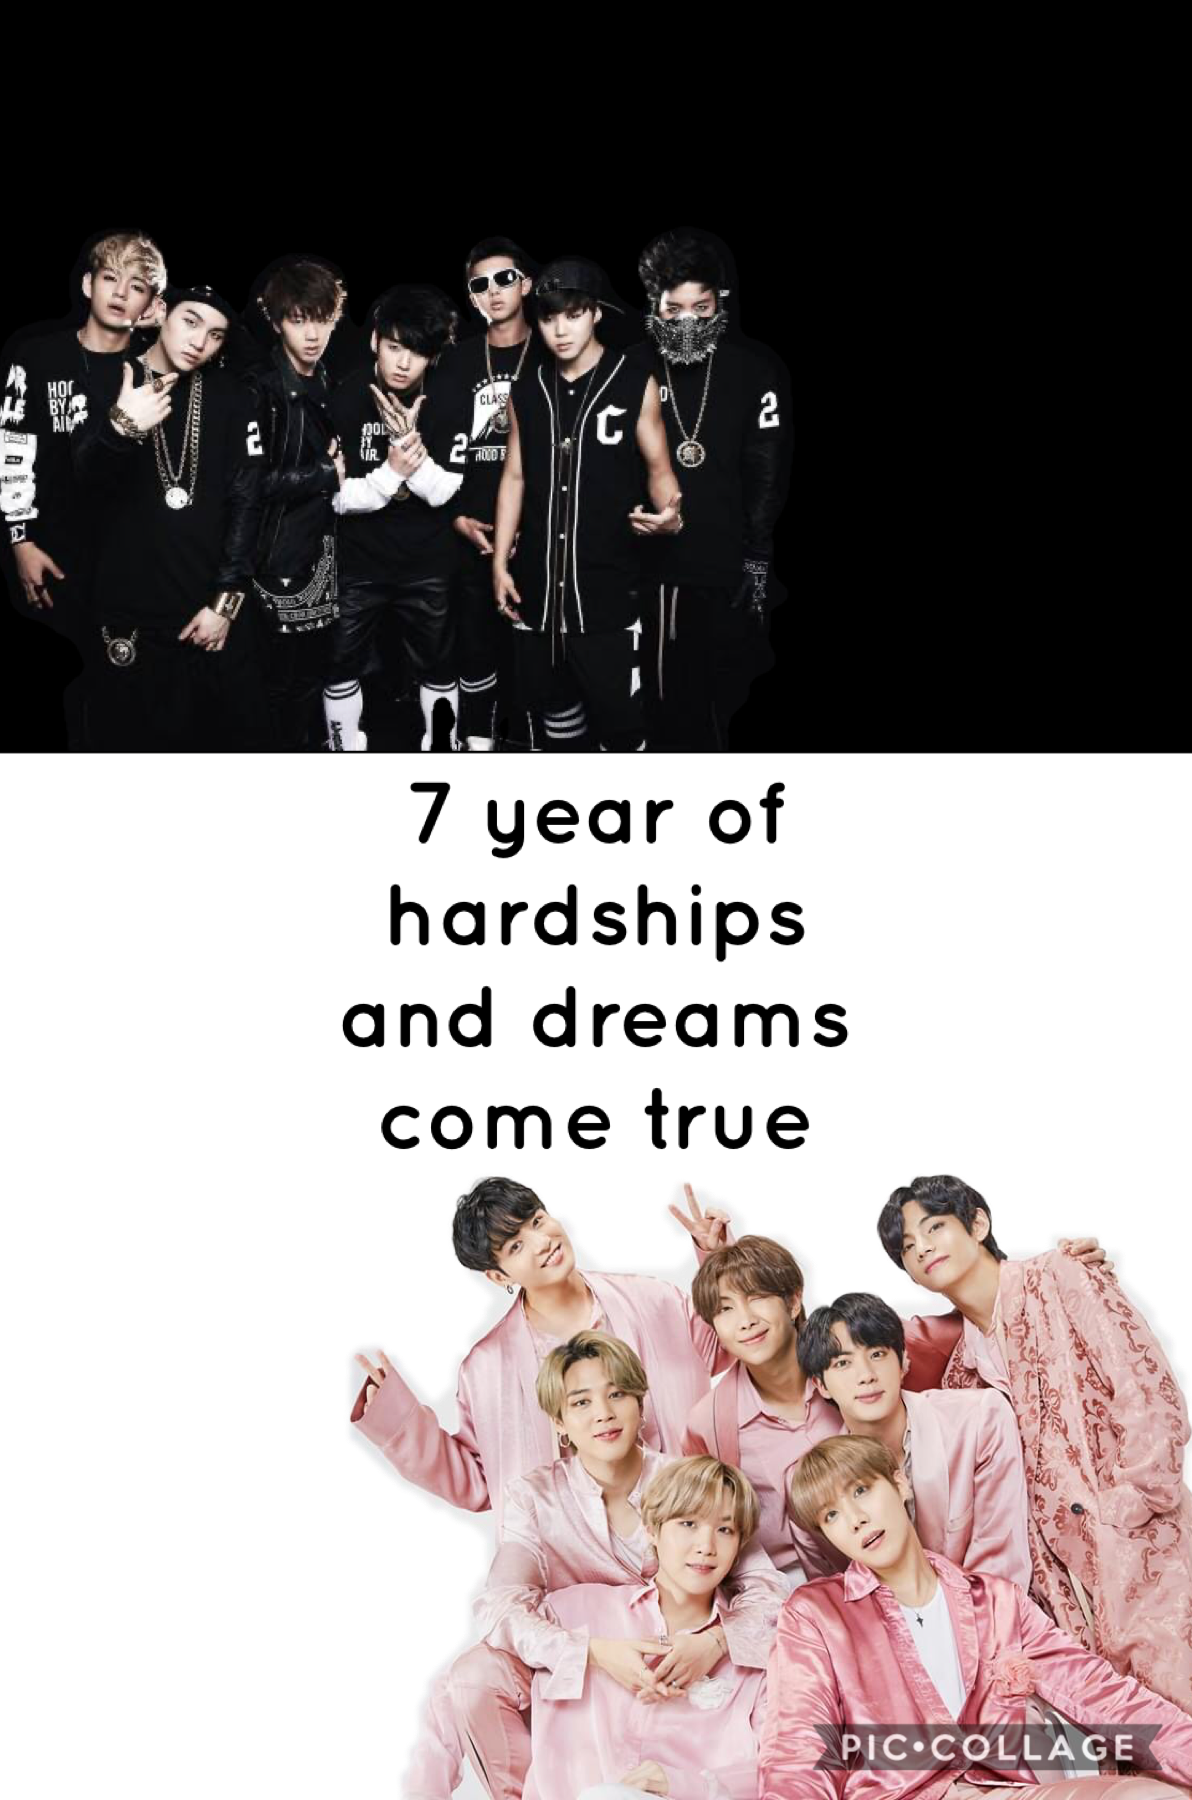 They have come such a long way , it’s been heck of a journey 🥺😭💜